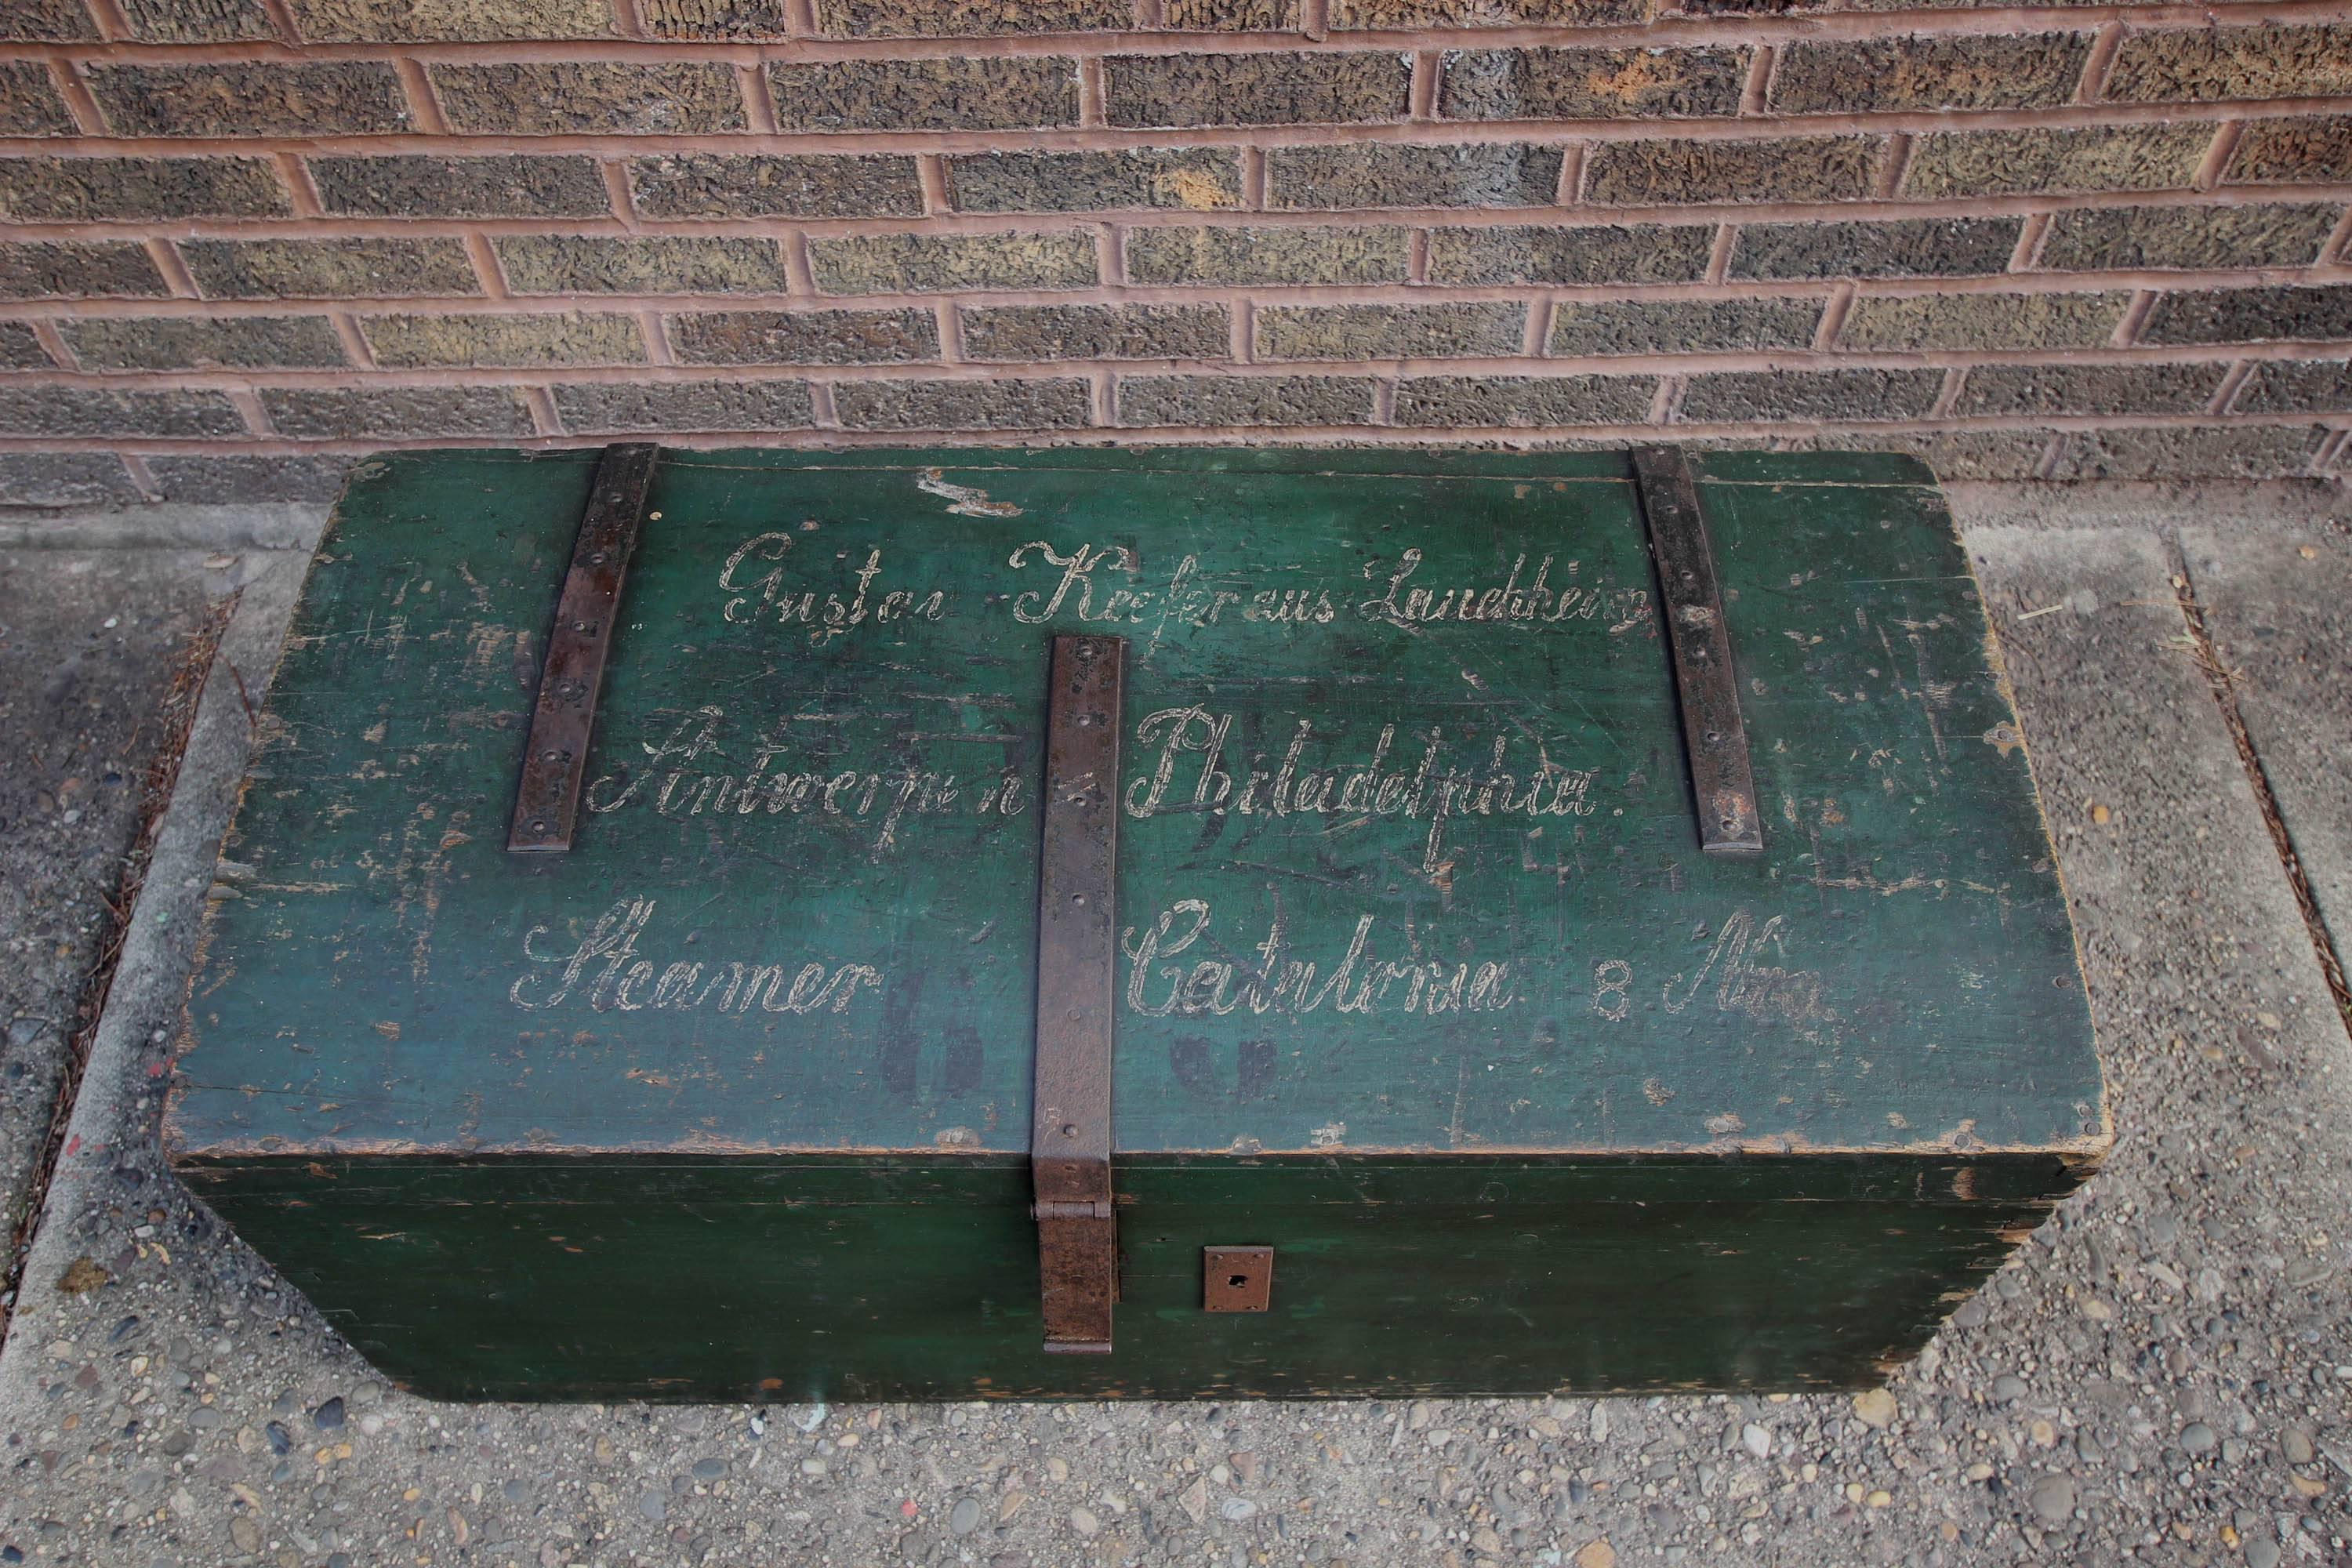 Deep green trunk with excellent, original wrought iron hardware - used for travel from Europe to the United States. Pine wood, dovetail construction; all original.

The top reads: Guston Keefer aus Lauchheim / Antwerp Philadelphia / Steamer